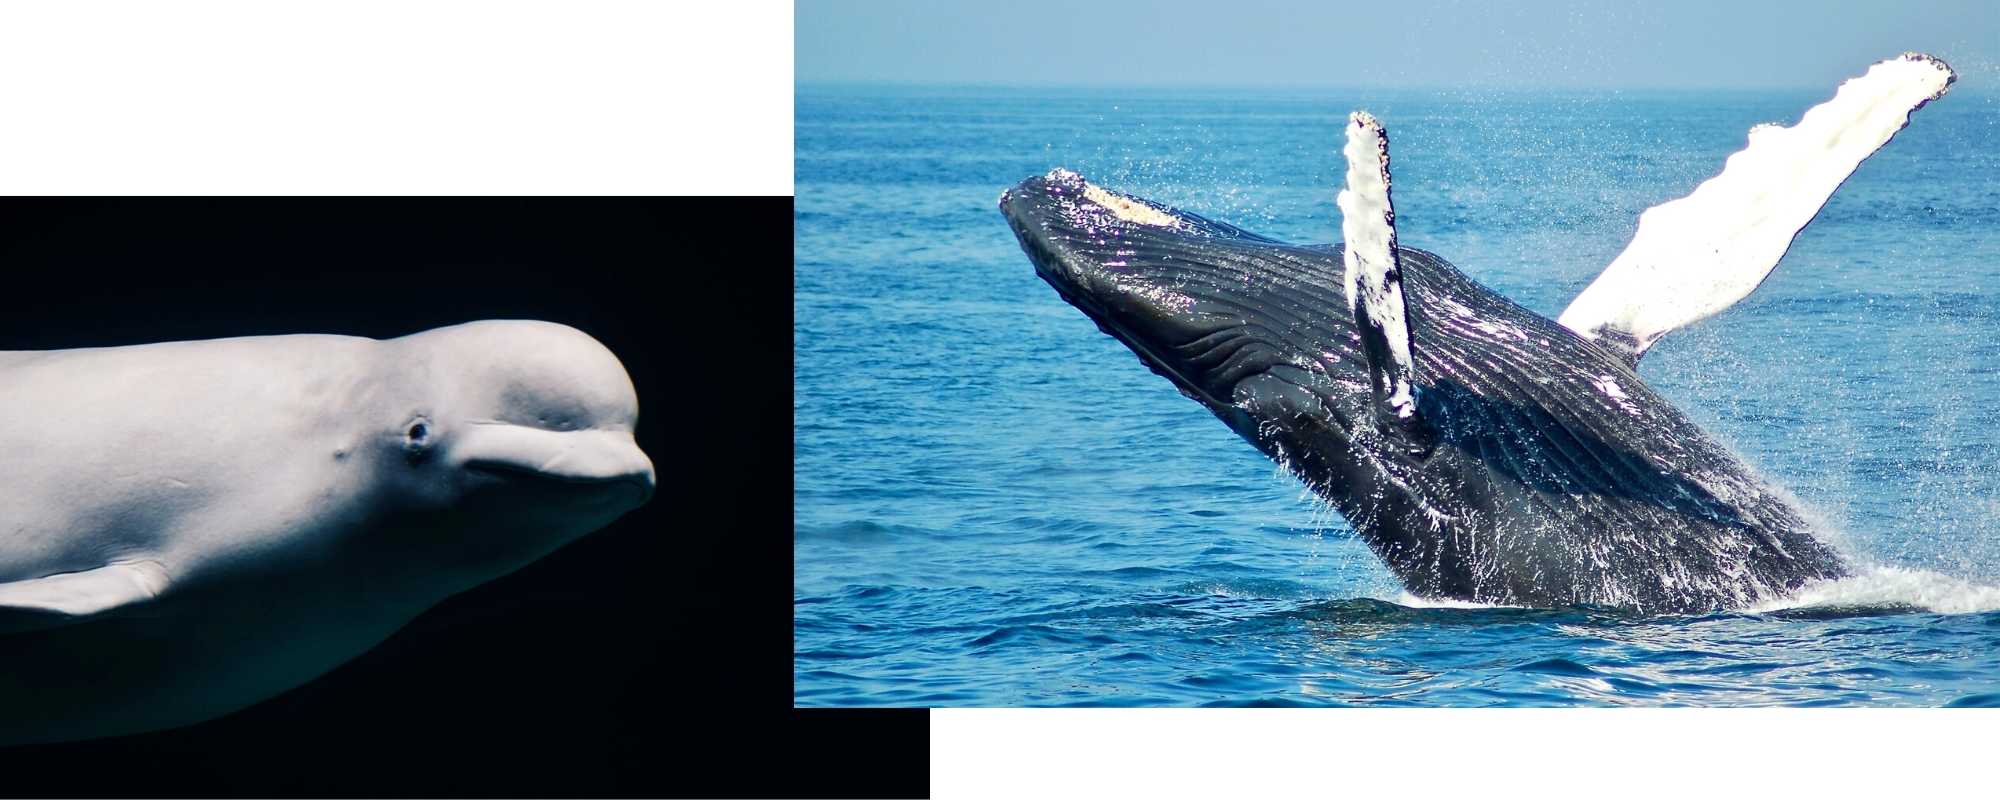 5 Gigantic Whale Facts - Wild In Africa® bracelets for wildlife